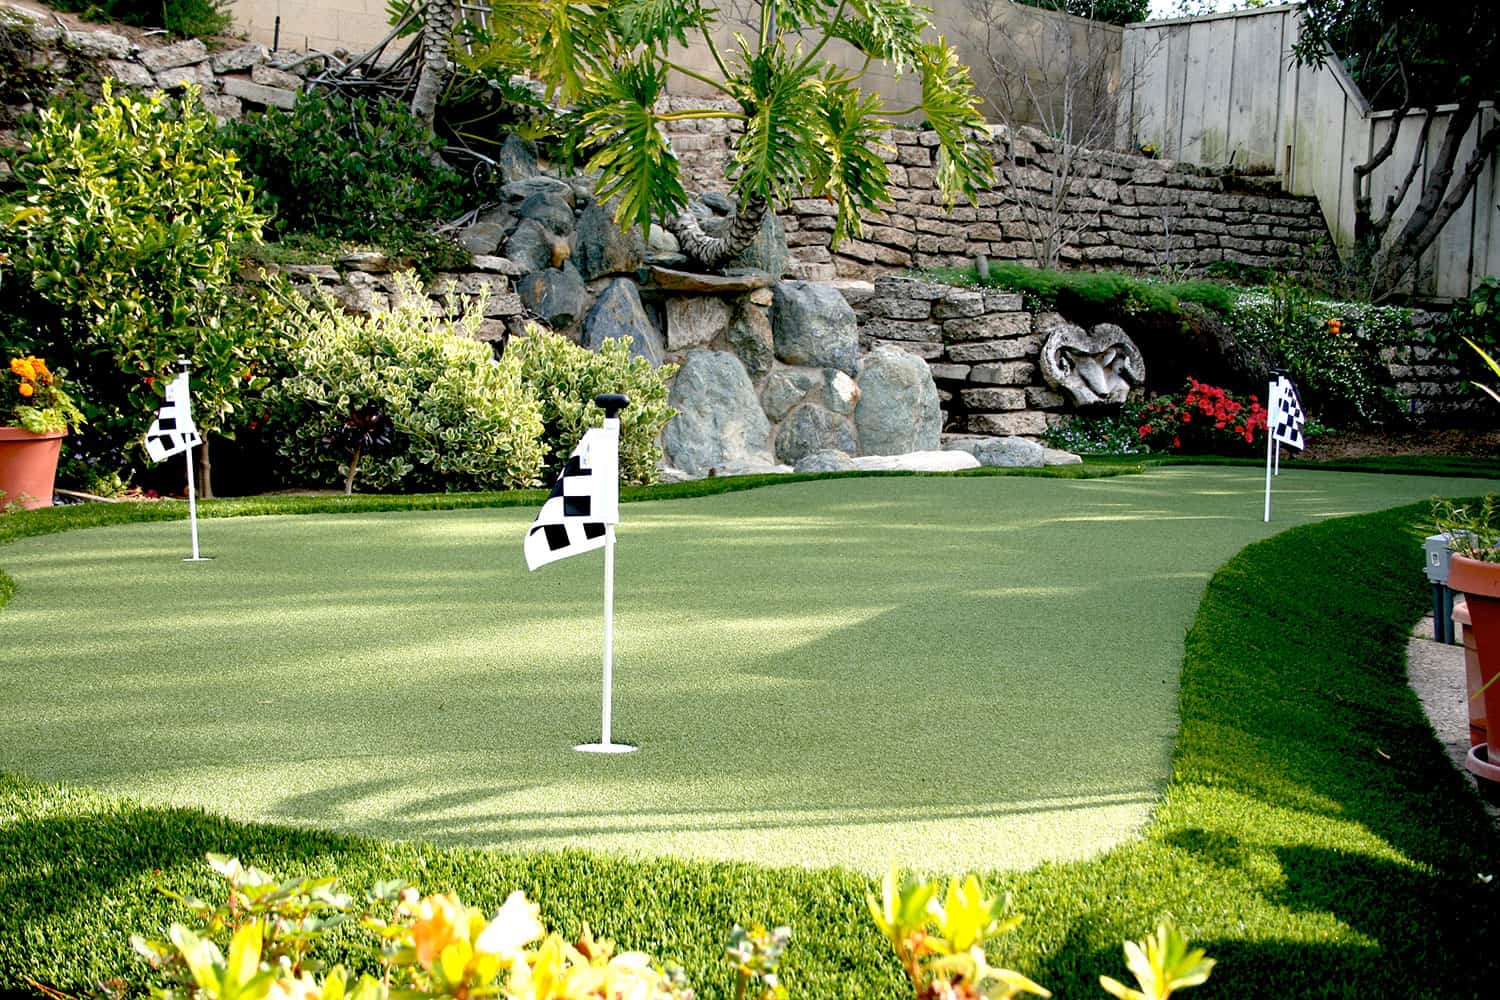 Tigerturf Artificial Grass Landscape Solutions Made In The Usa